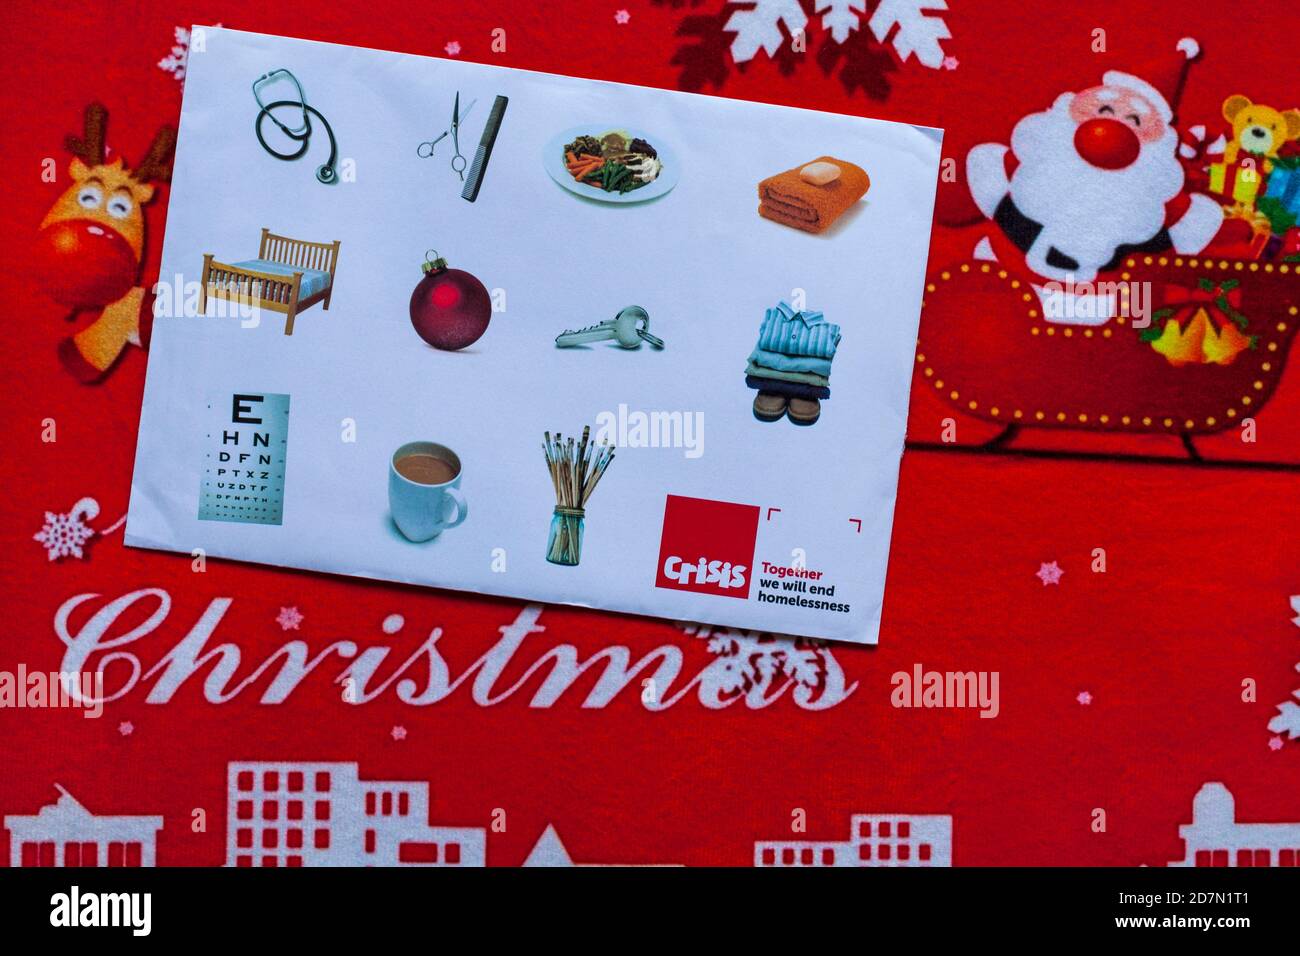 Post on Christmas mat - charity appeal, Crisis together we will end homelessness Stock Photo